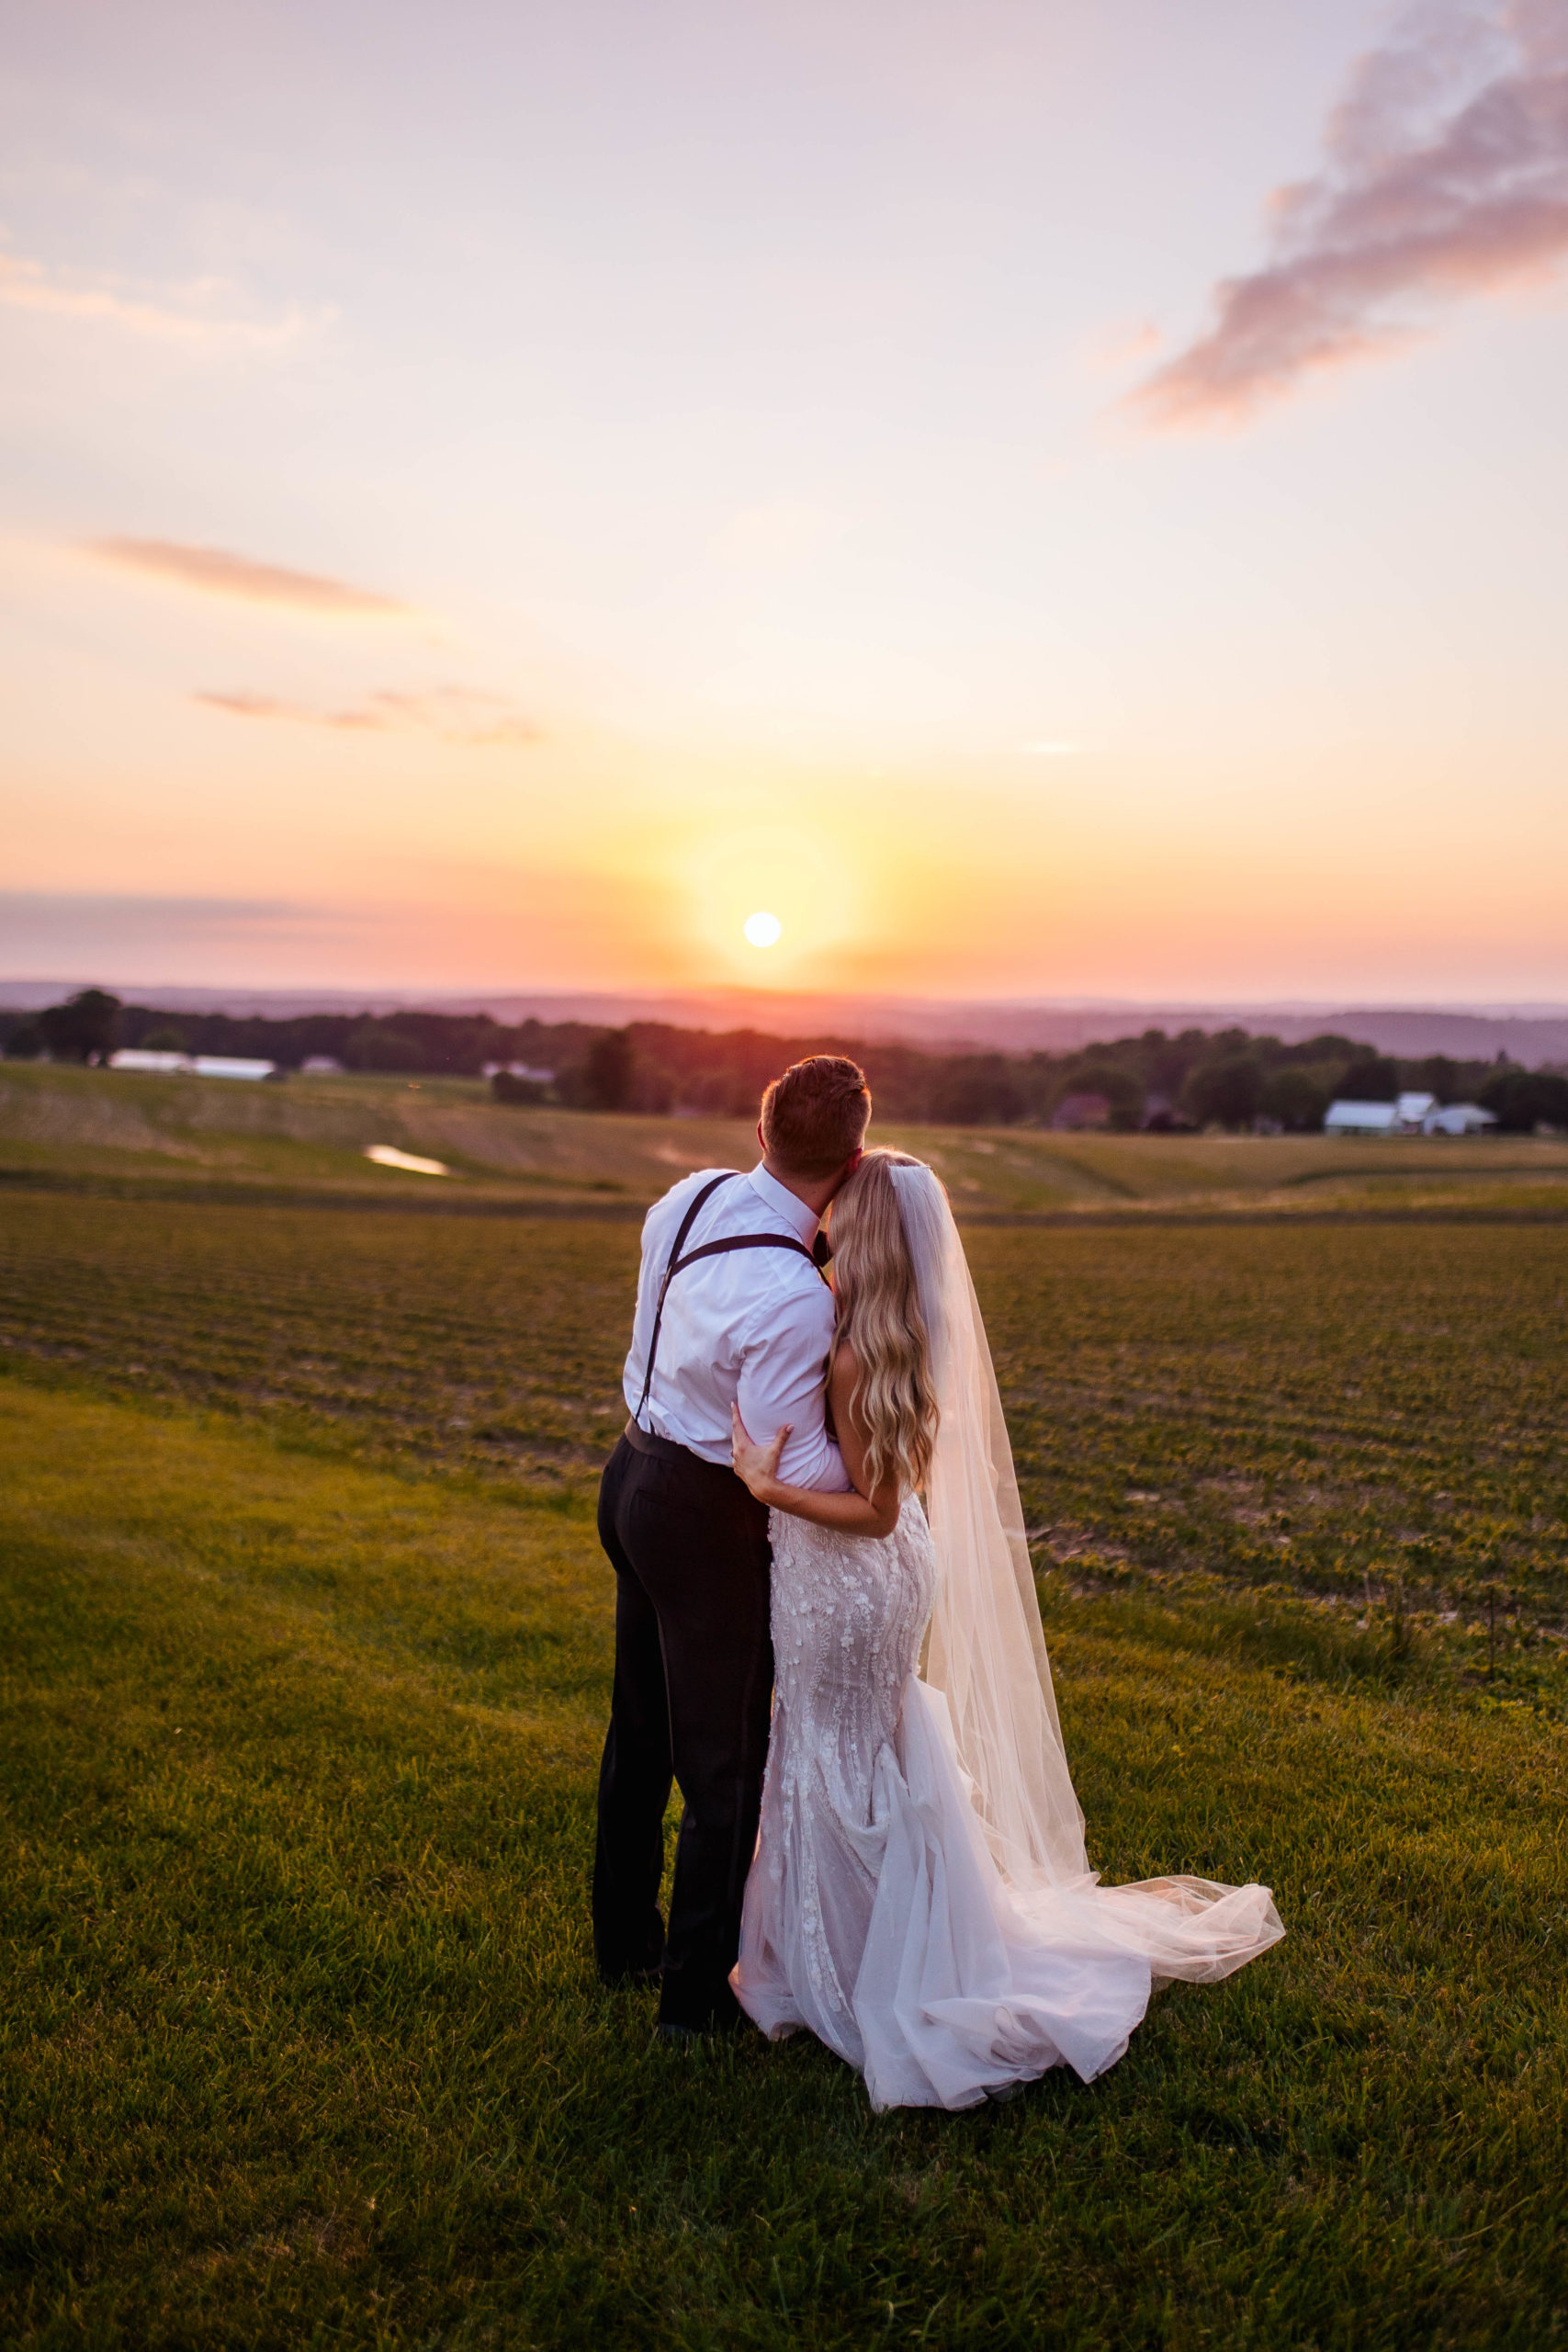 bride and groom hugging each other and watching the sunset in a large field